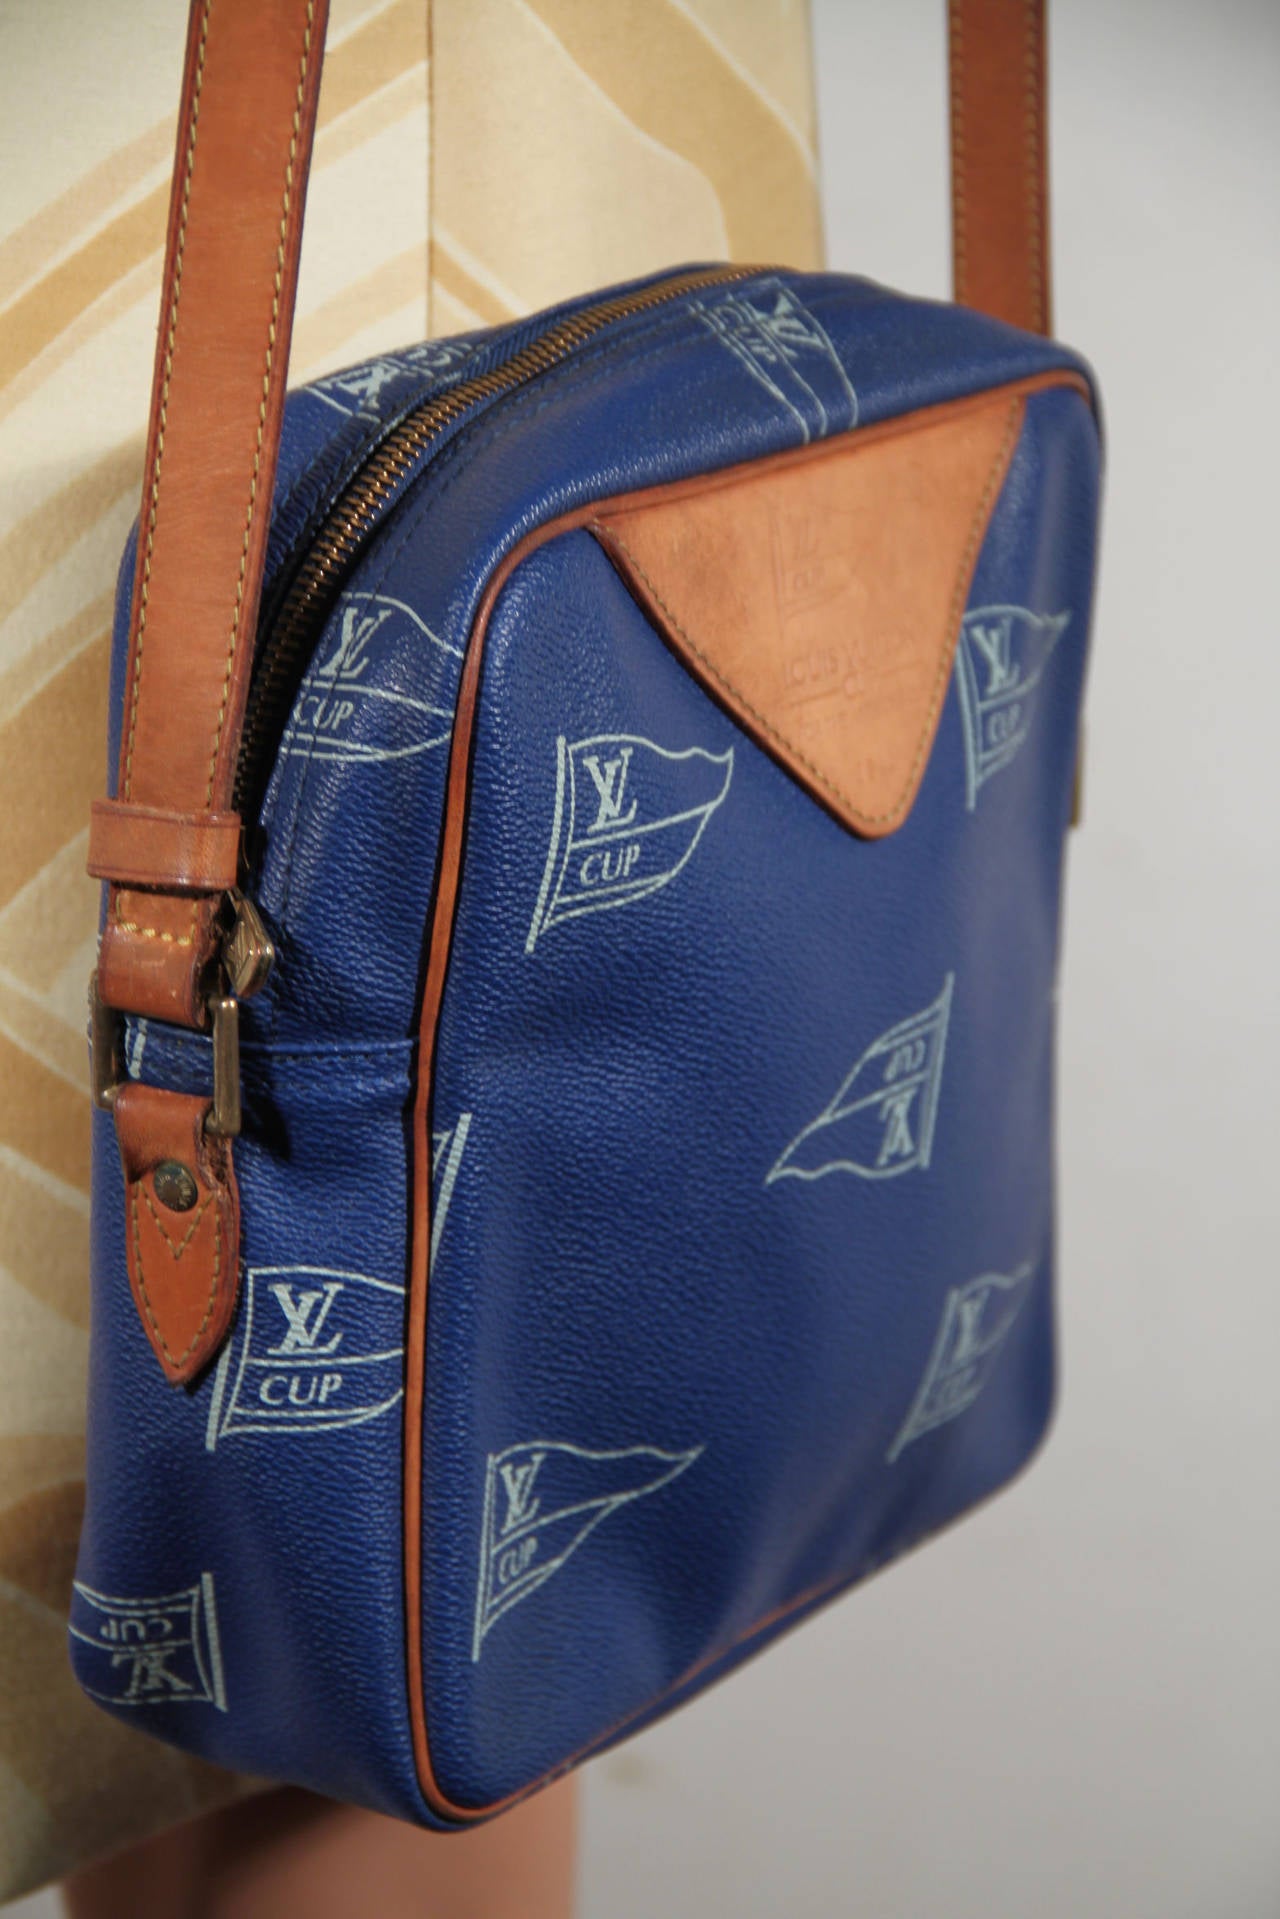 Rare LOUIS VUITTON messeneger bag from the 1992 Collections America's cup Challenge! In 1992 LOUIS VUITTON released a line in honour of the race being held . The LV Cup flag logo was silk-screaned onto a beautiful blue coated canvas. Genuine leather